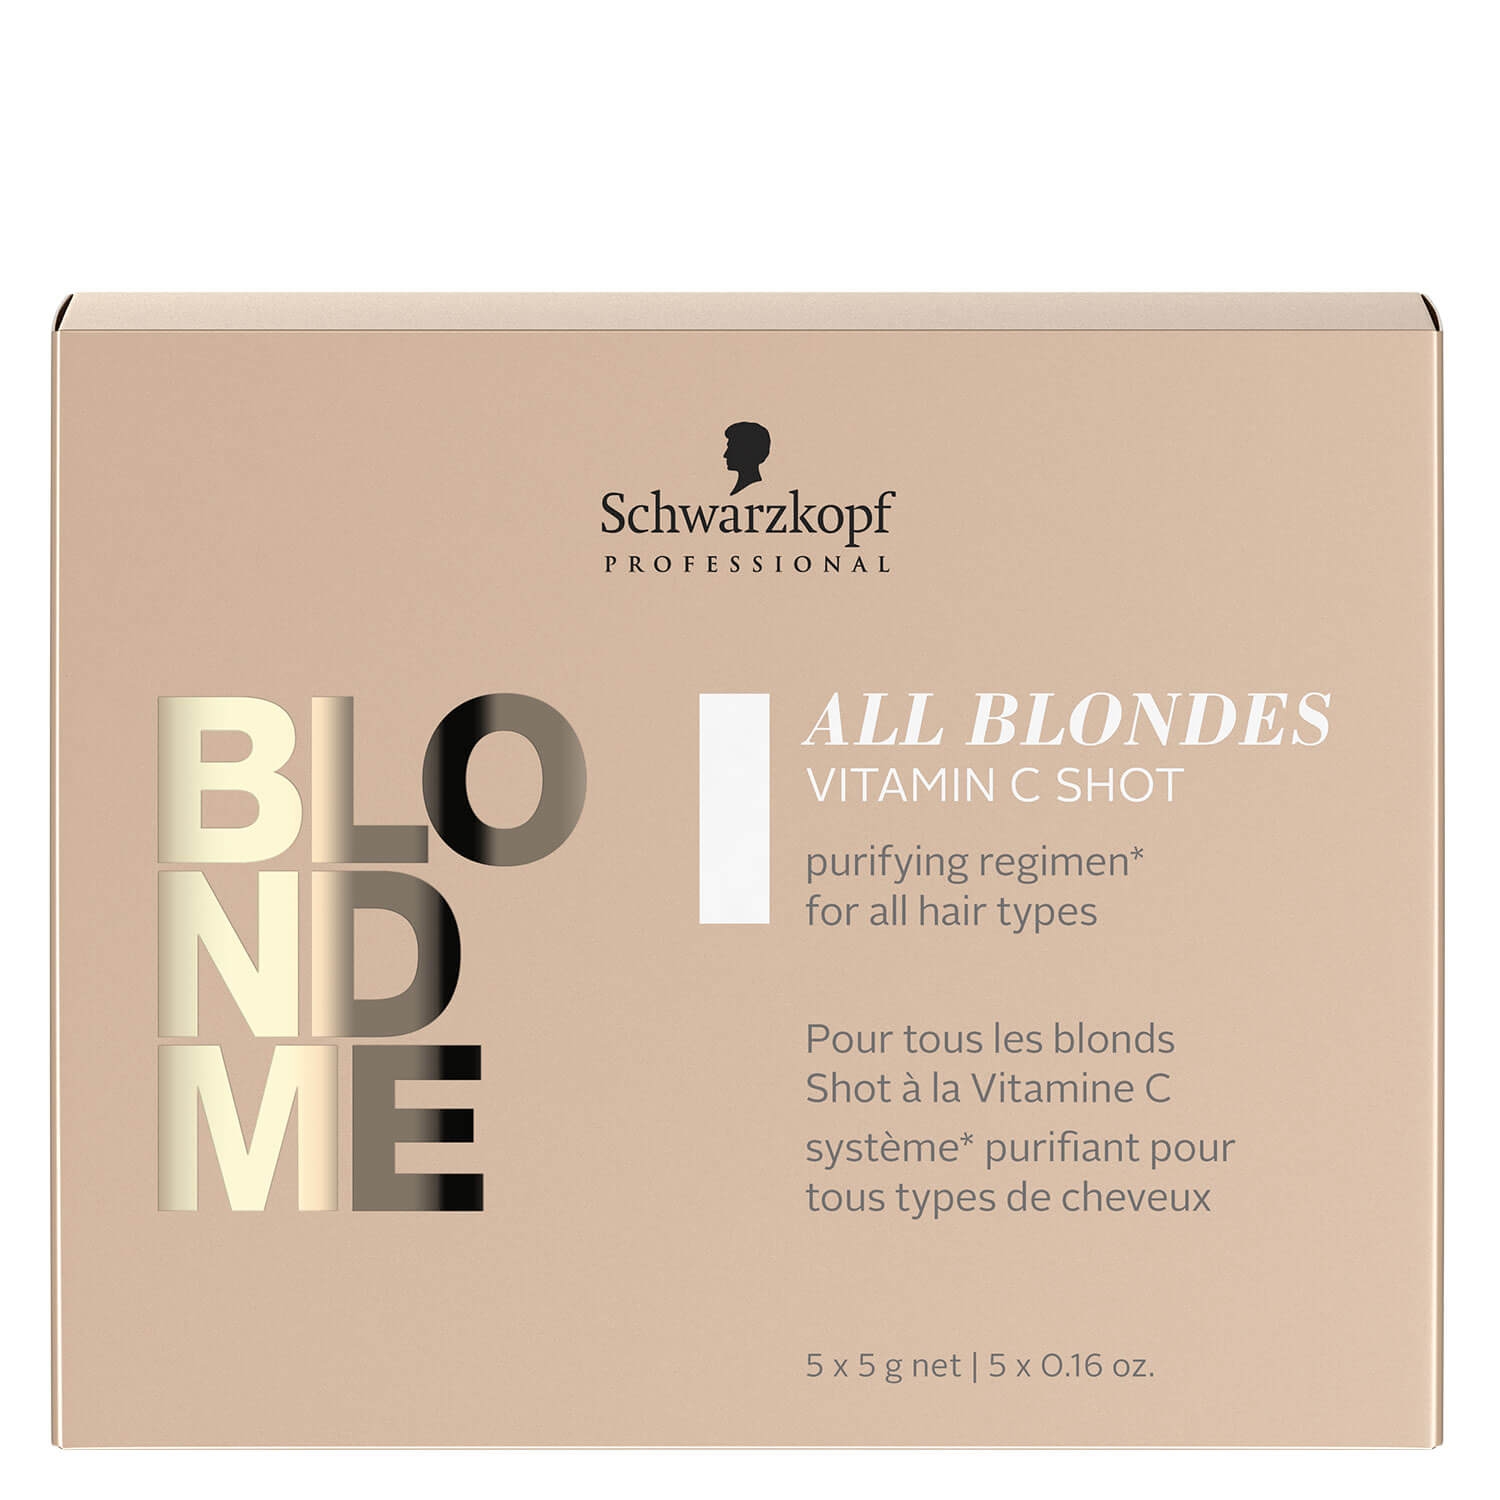 Product image from Blondme - All Blondes Detox Vitamin C Shots